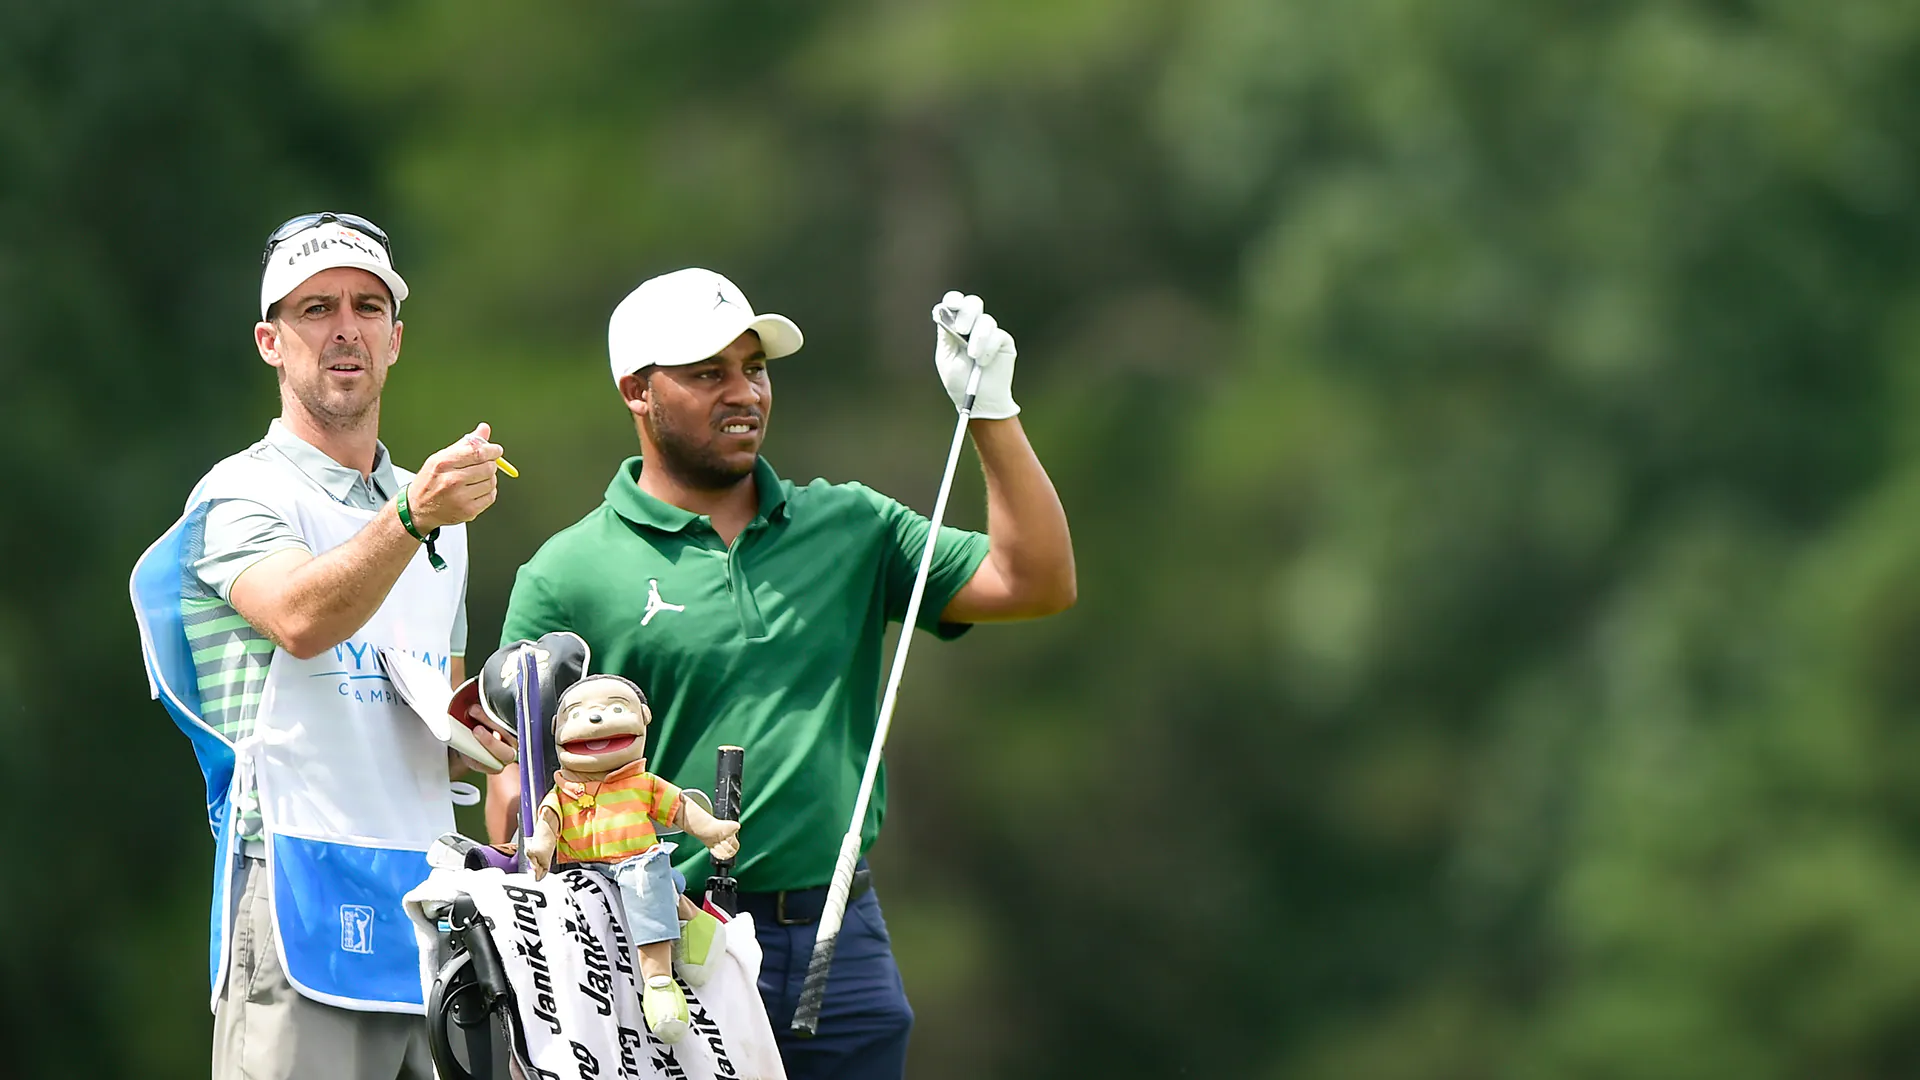 Harold Varner III’s looper wins Players caddie competition with record shot